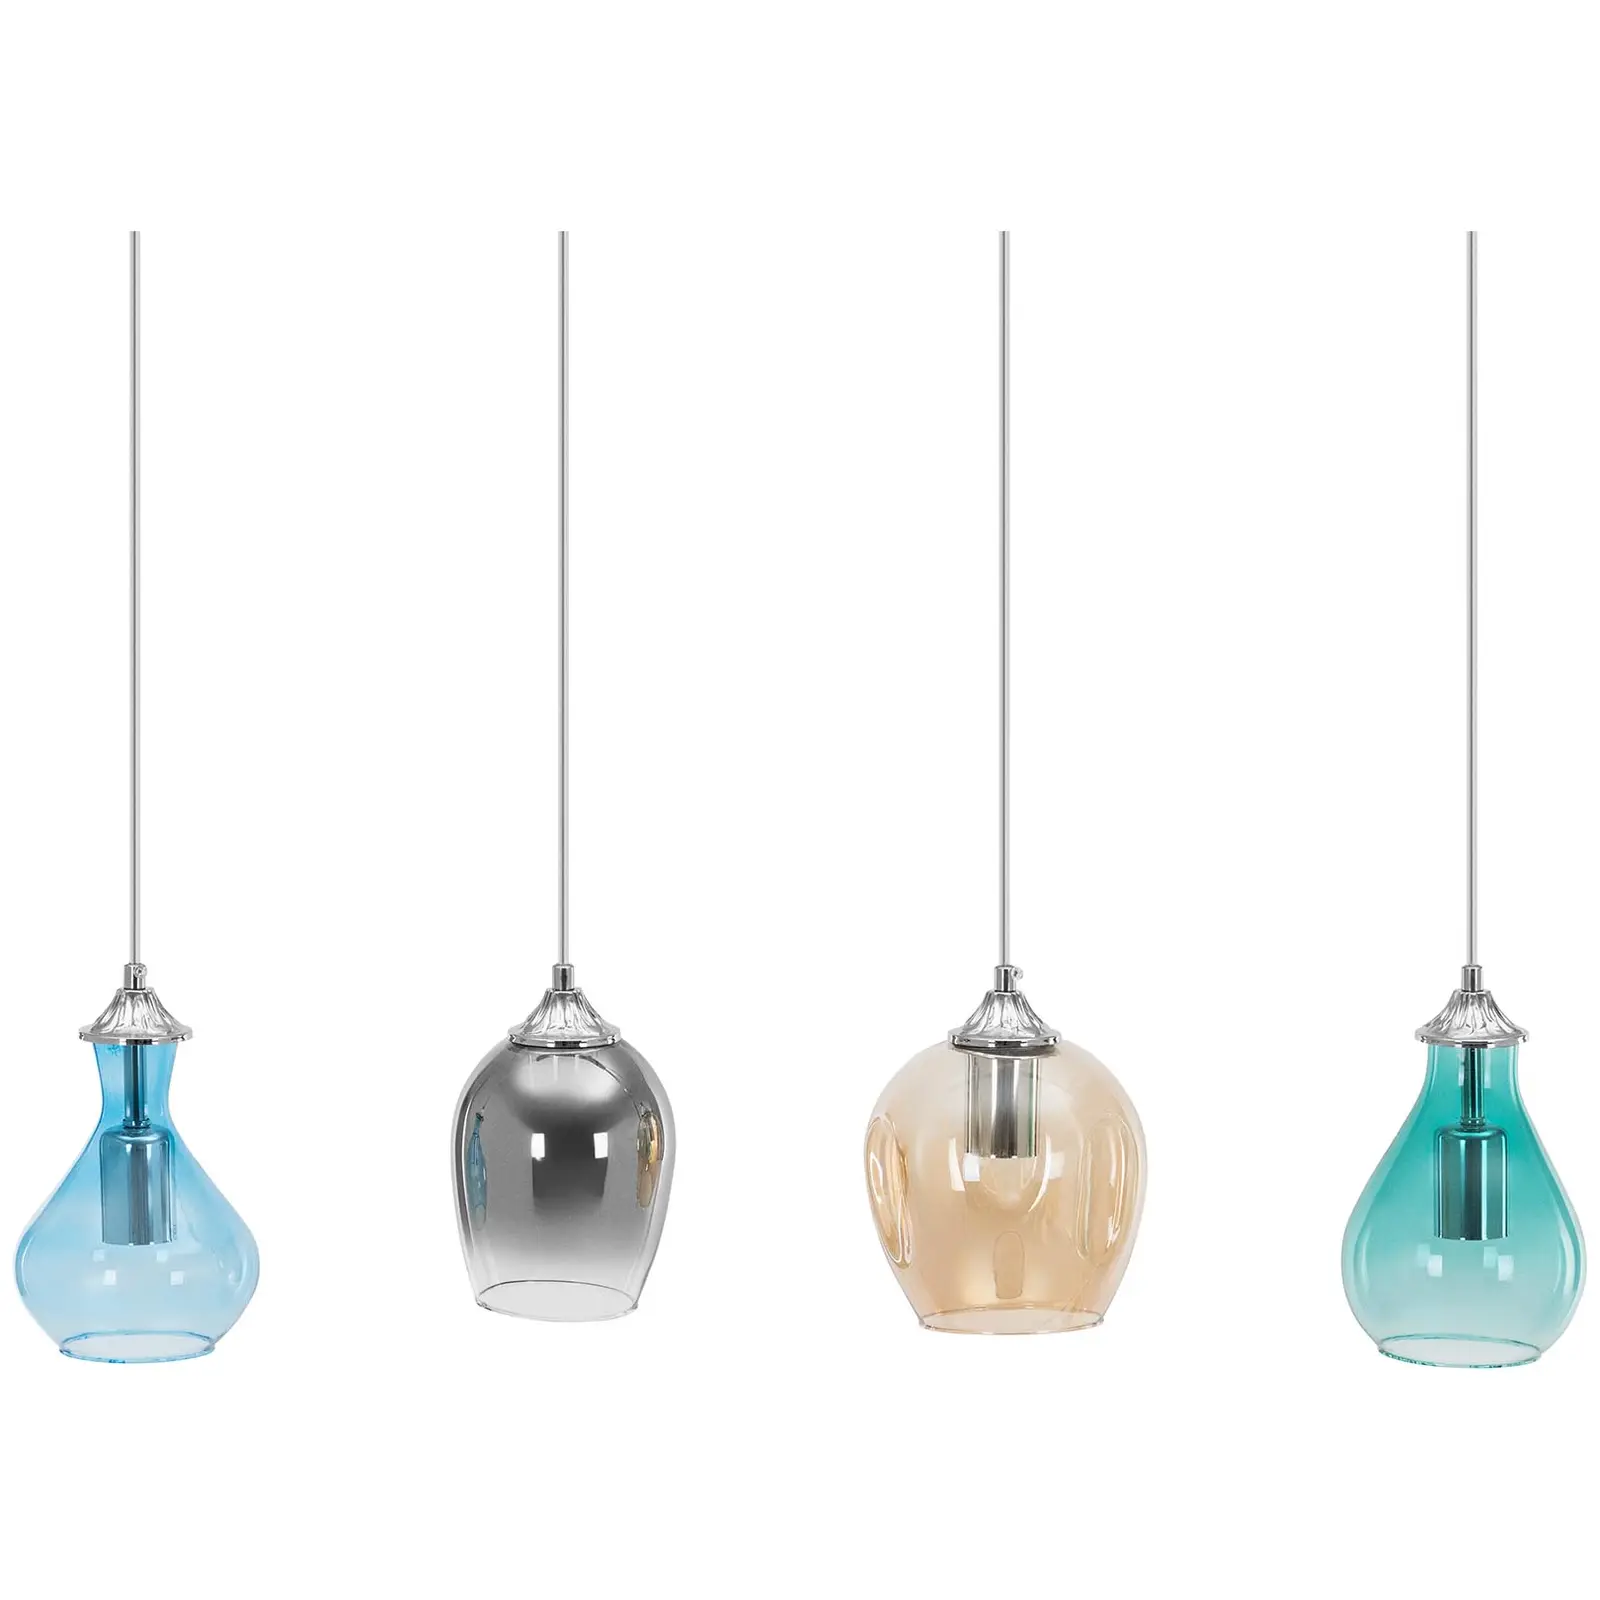 Pendant Light - 4 light sources - glass shades in various shapes